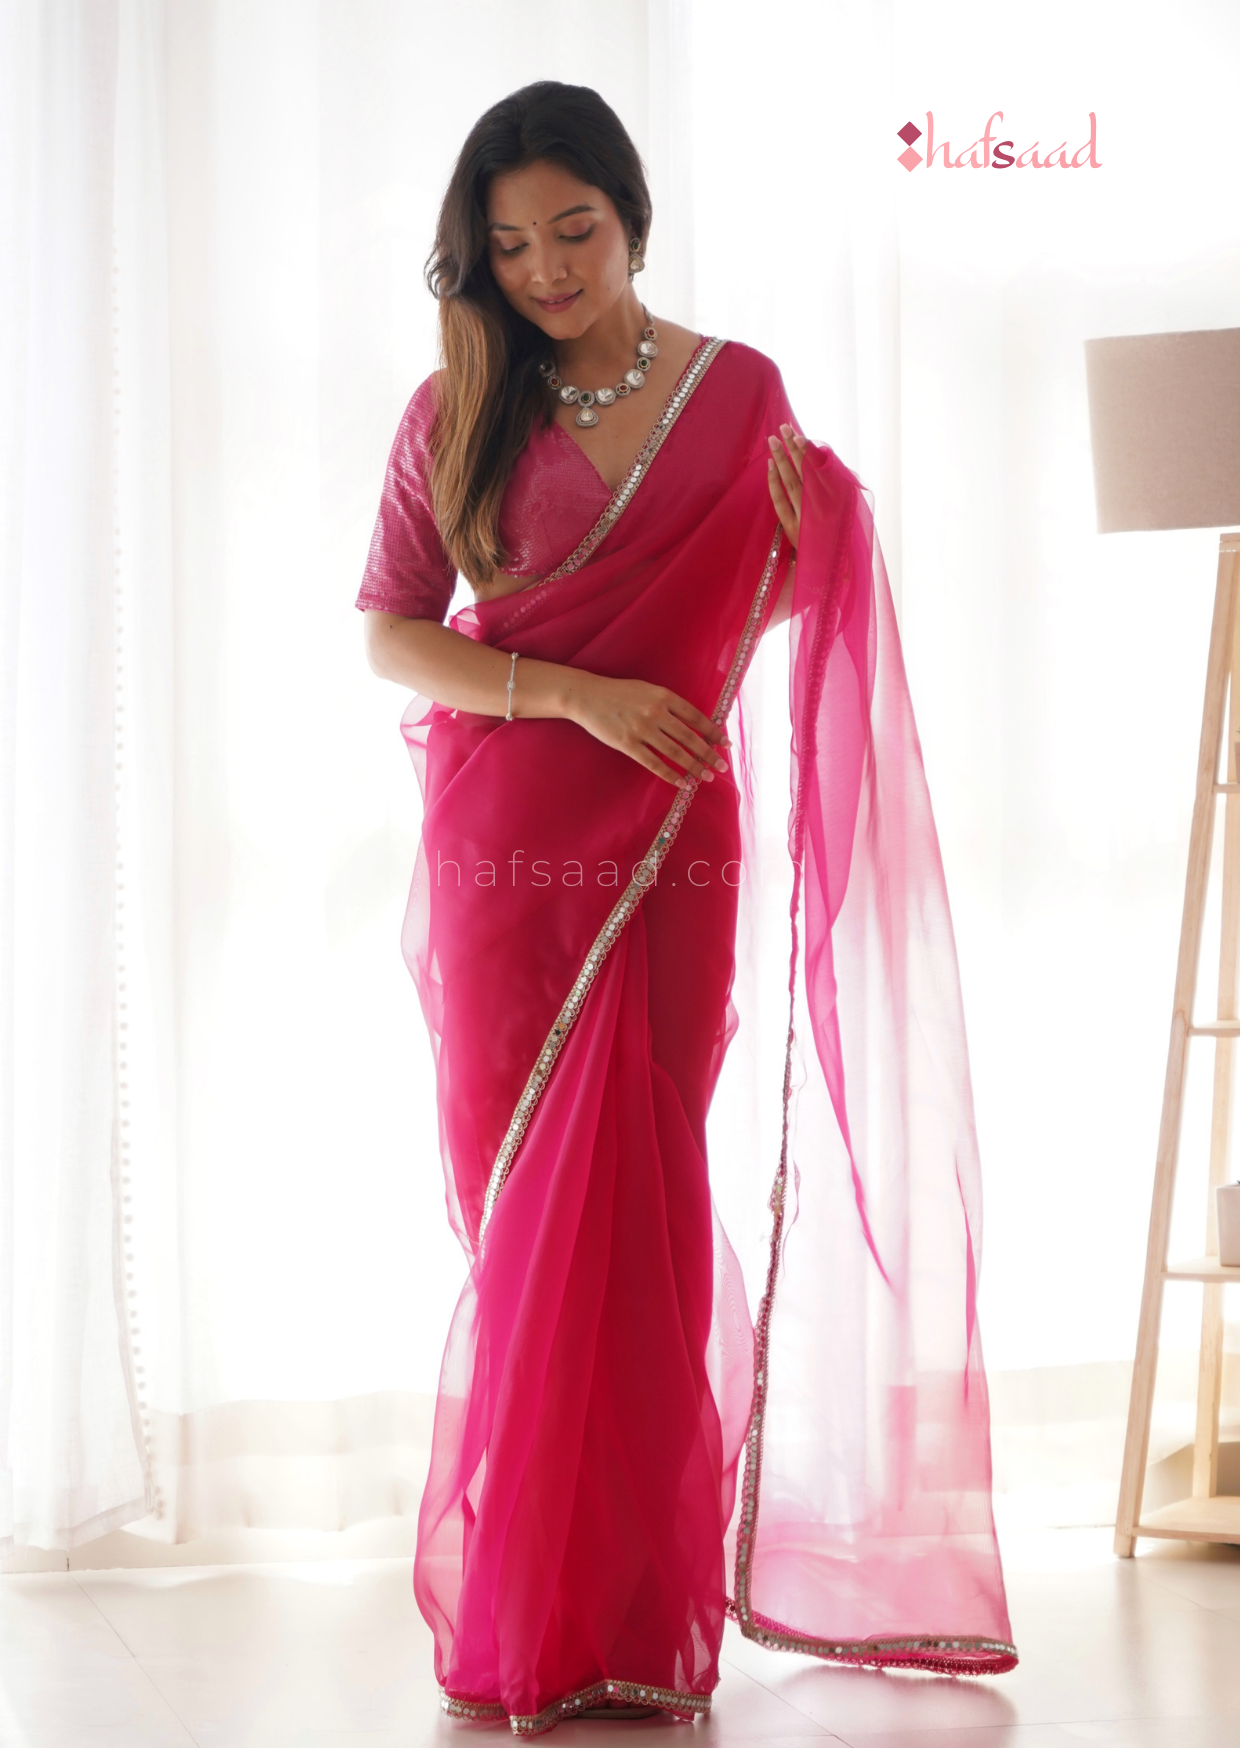 Haseen- Ready to wear saree(Hot pink)